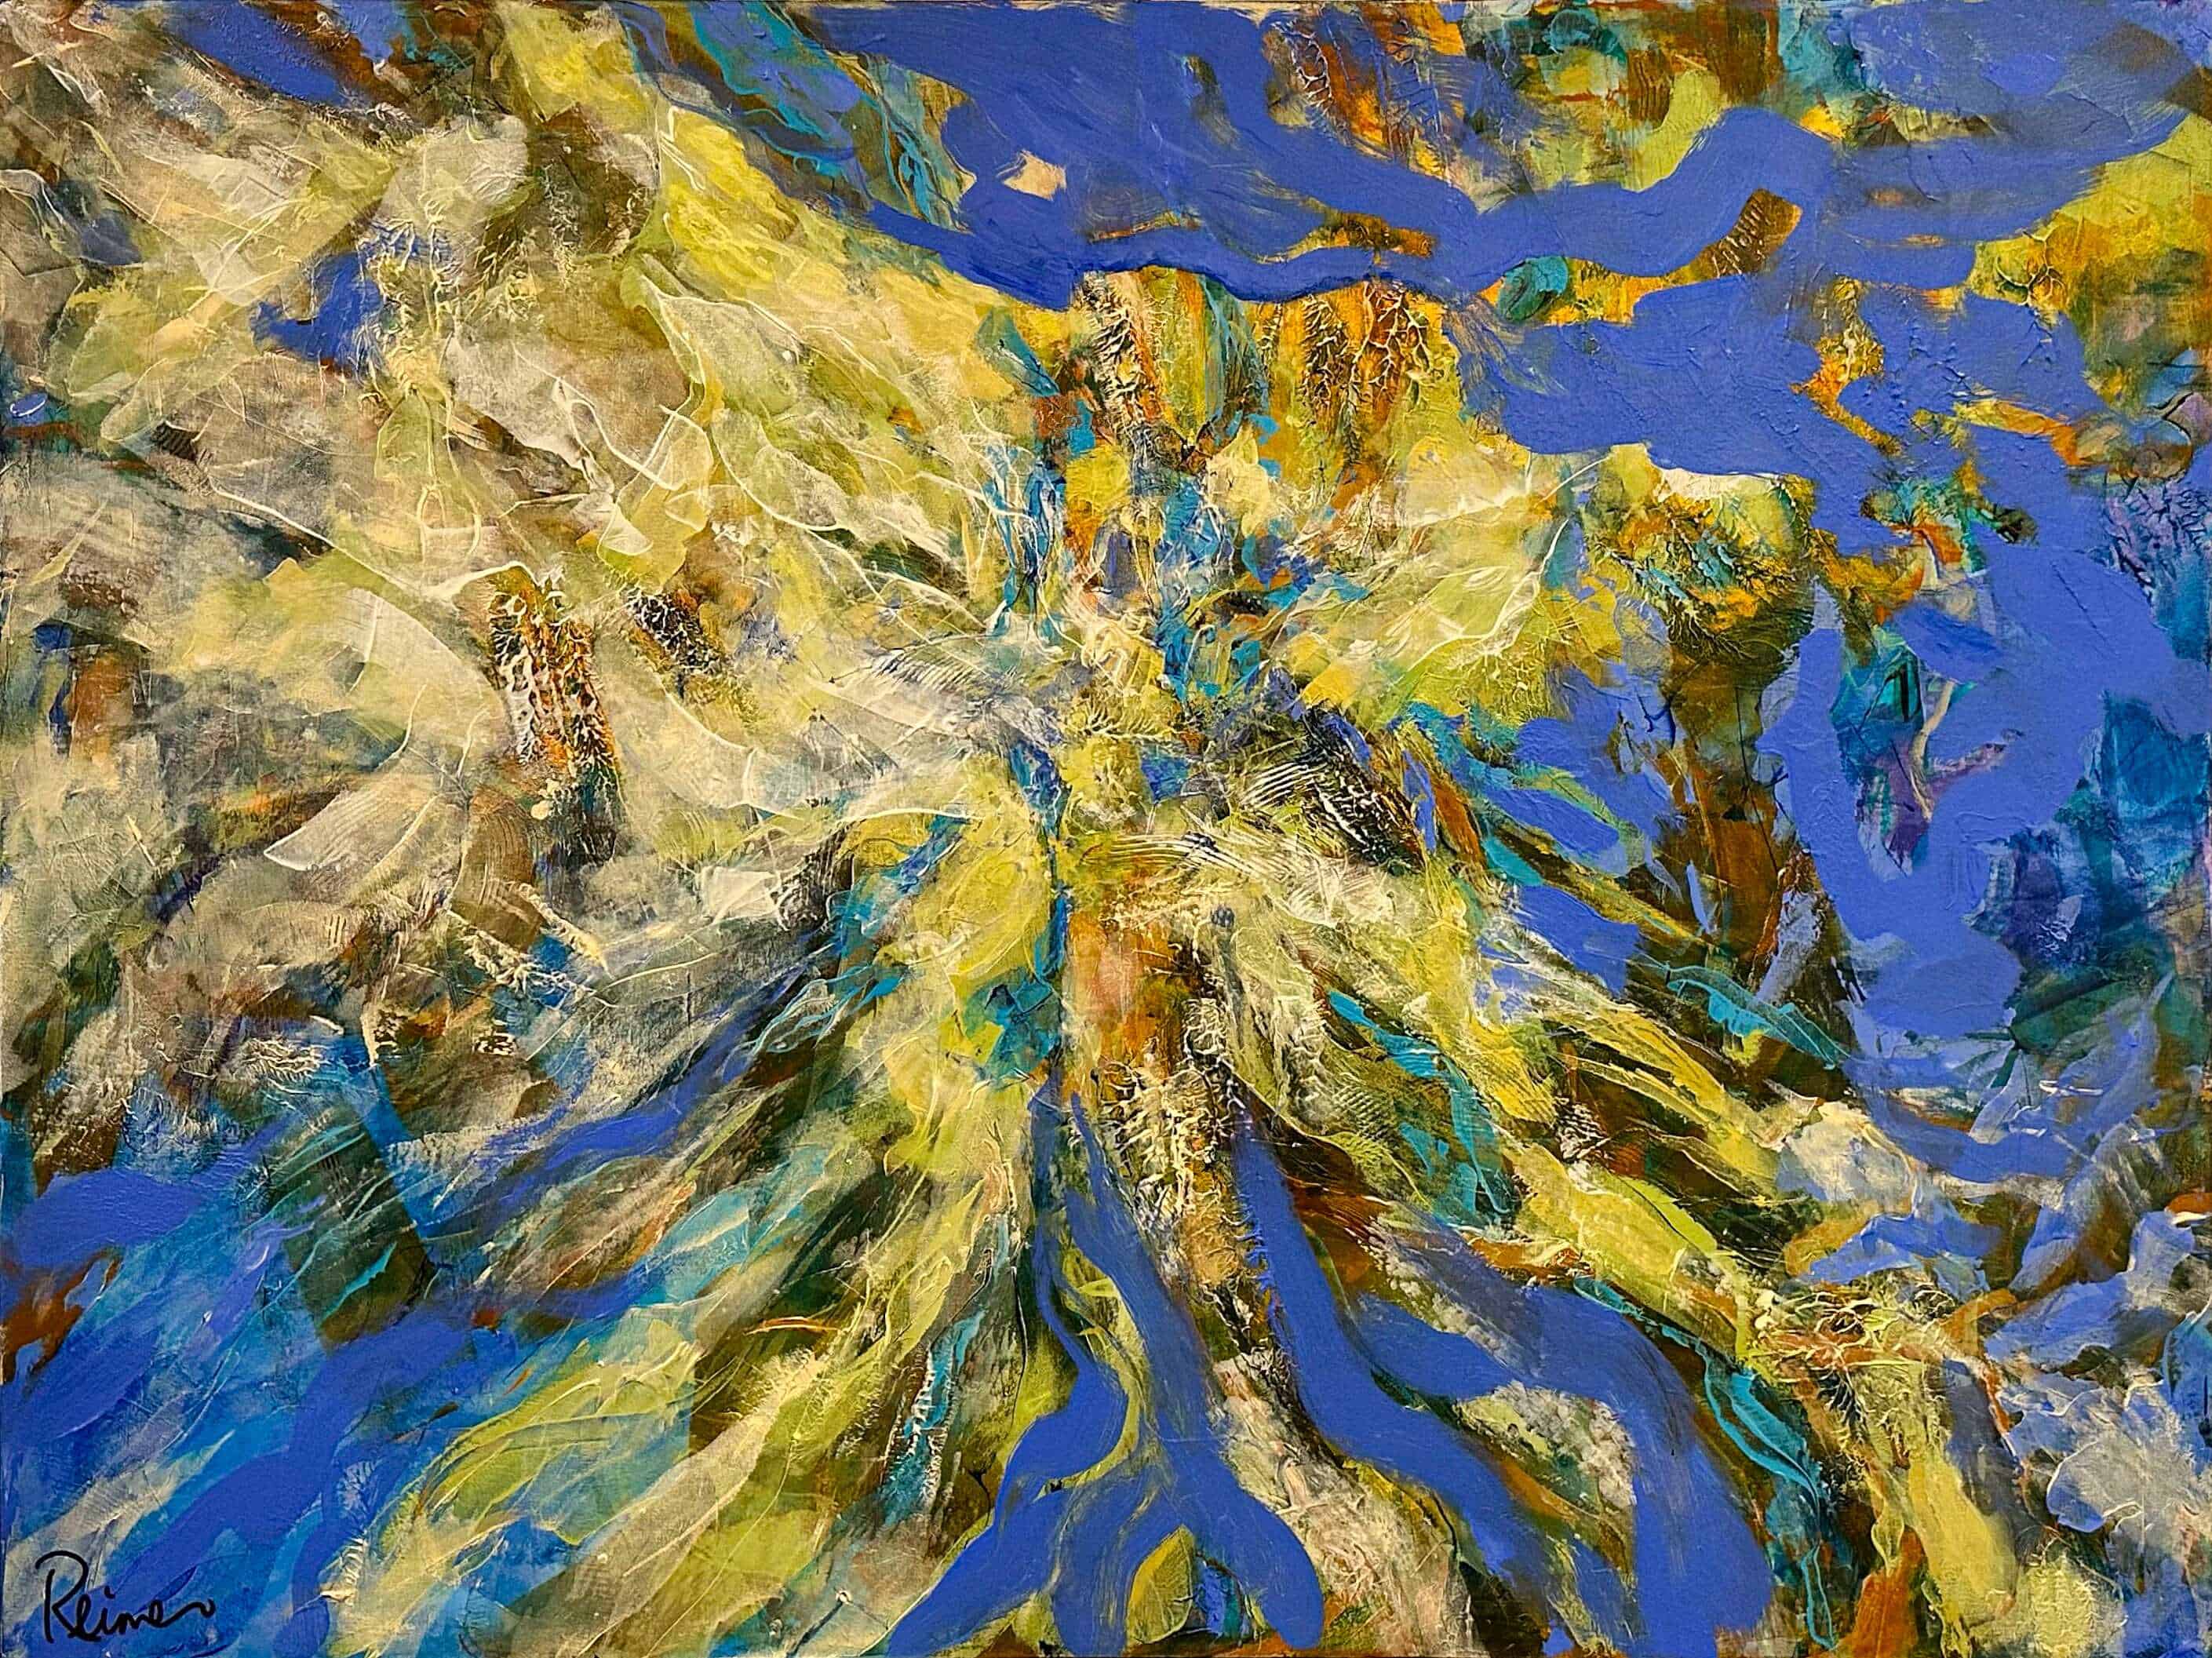 Abstract Art. Title: Through Veiled Eyes, Acrylic on Canvas, 36 x 48 in by Contemporary Canadian Artist Christine Reimer.